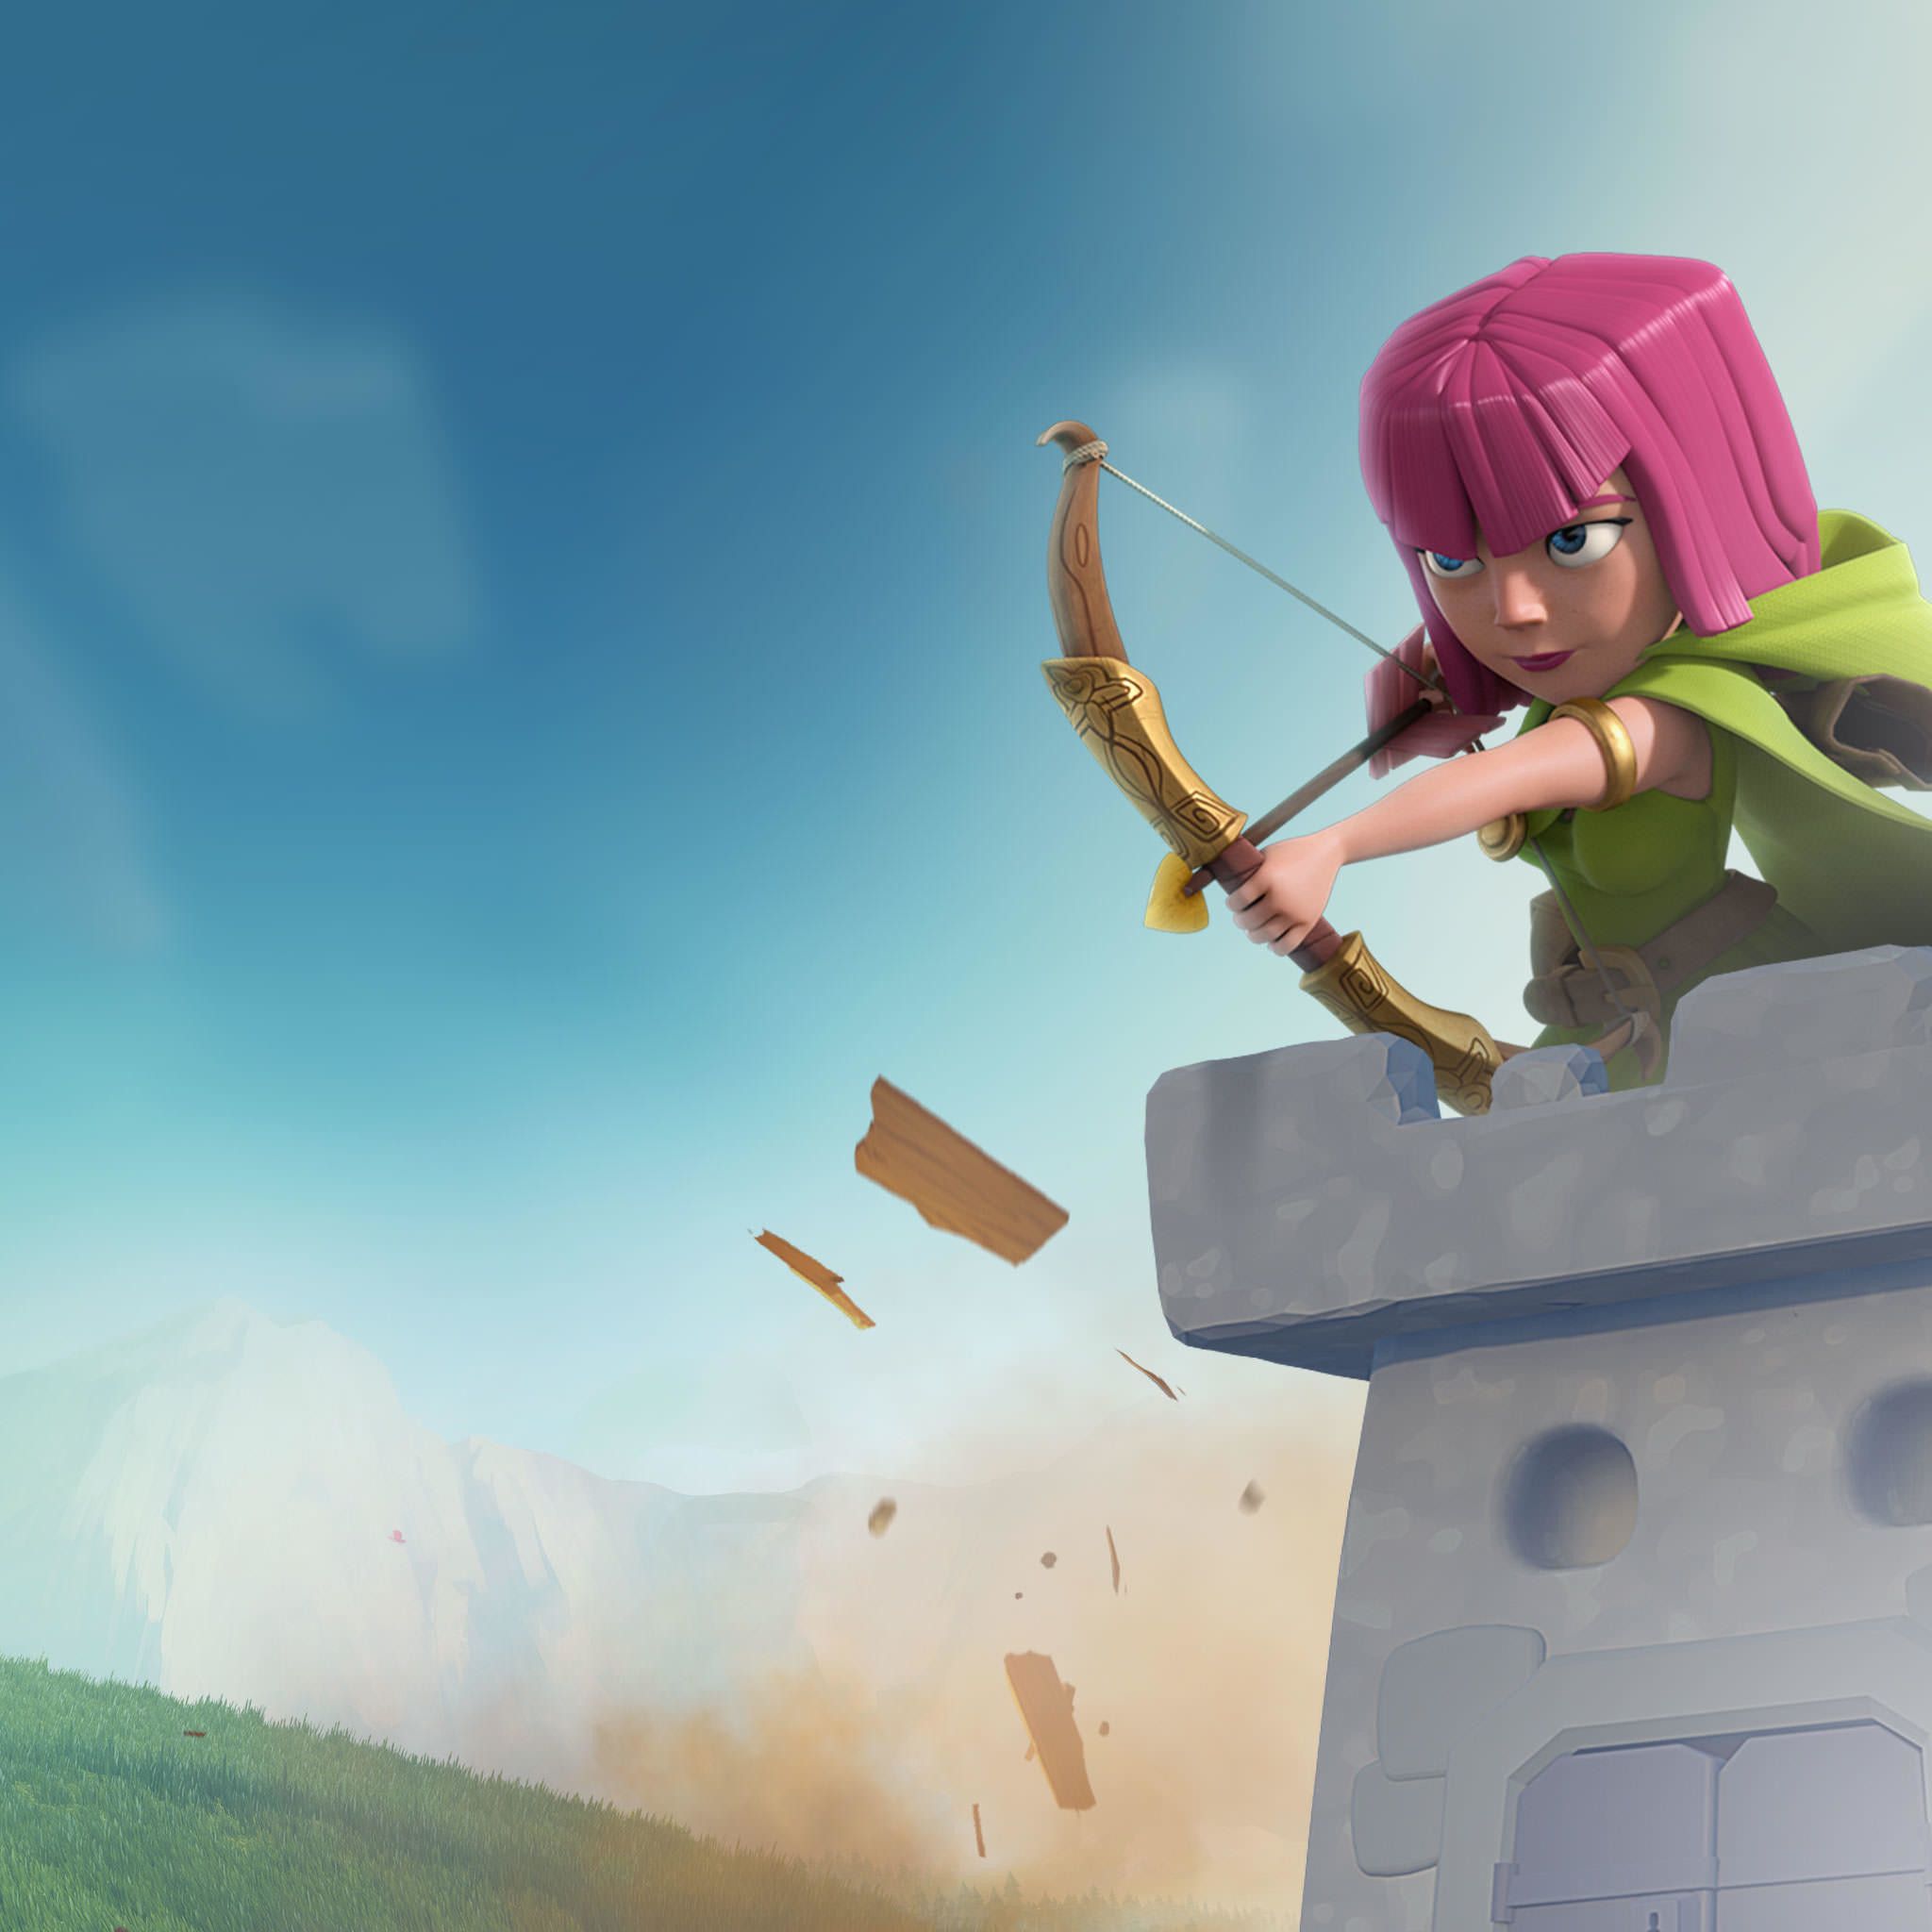 Download Clash Of Clans Archer Wallpaper For Android